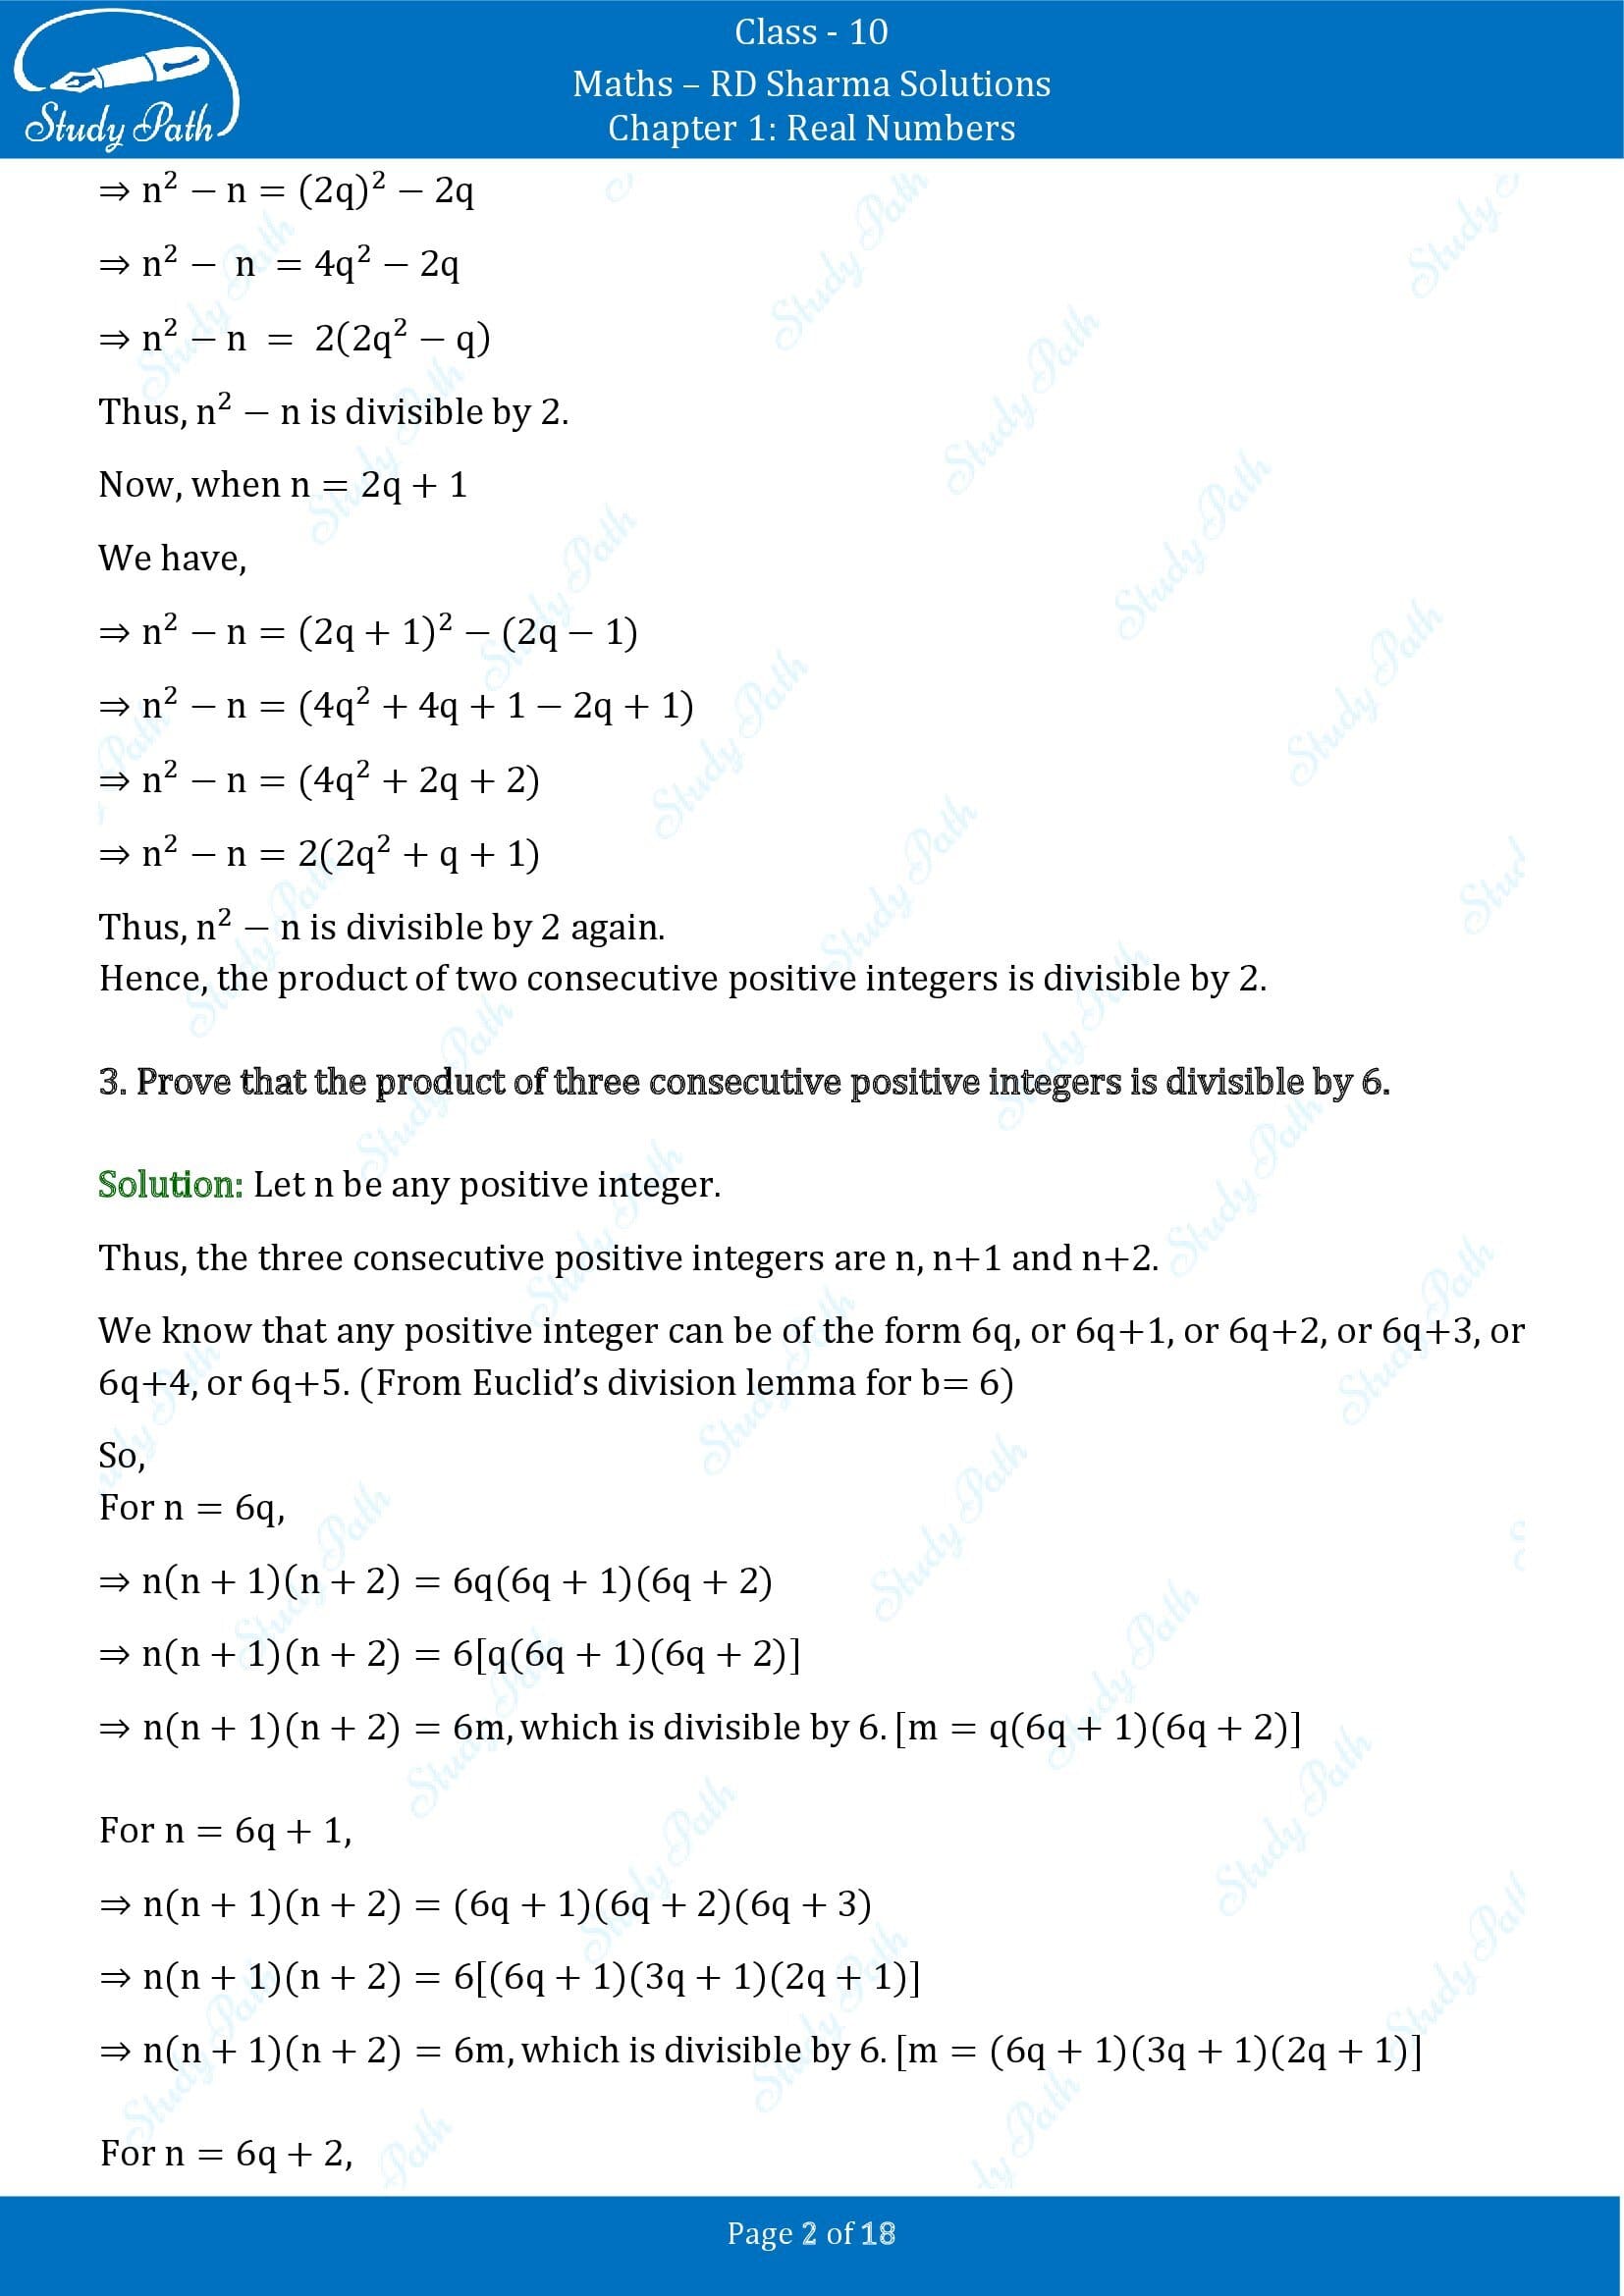 RD Sharma Solutions Class 10 Chapter 1 Real Numbers Exercise 1.1 00002